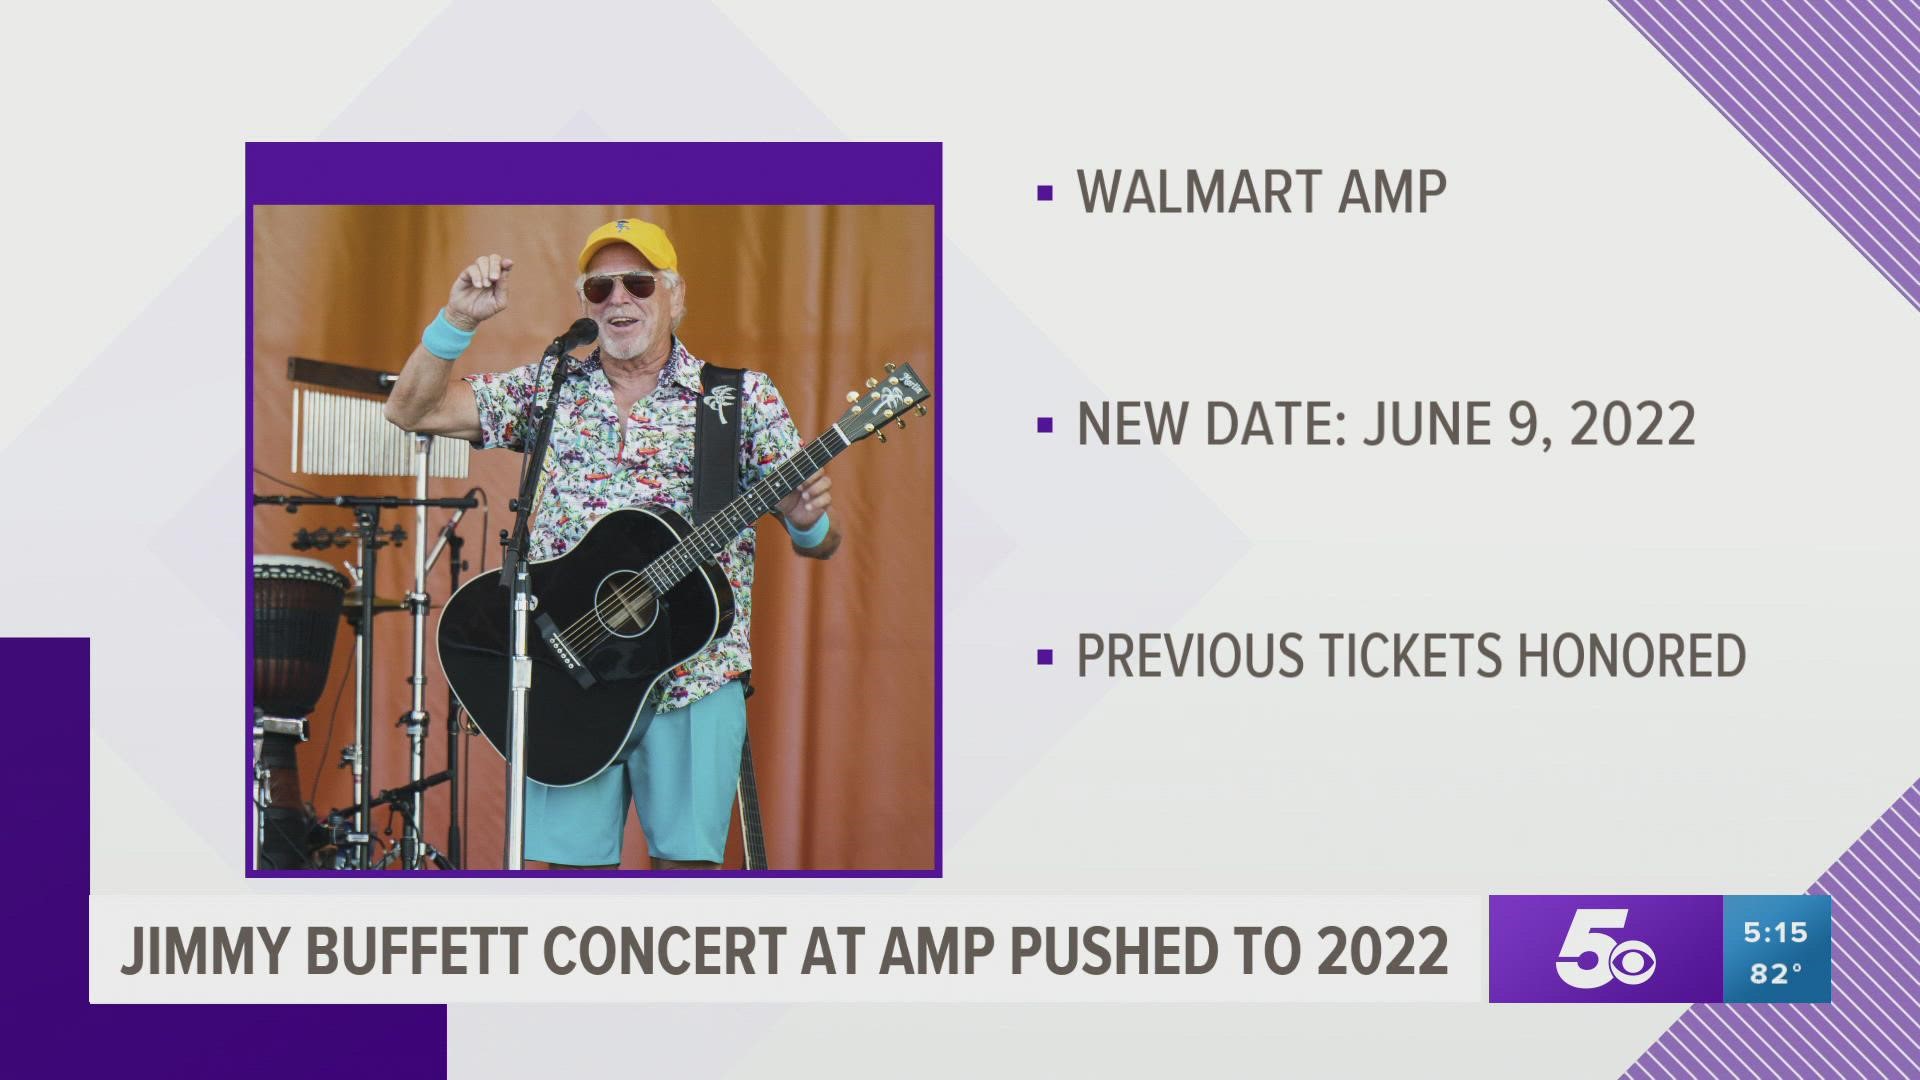 Parrottheads will have to wait until next year to see Jimmy Buffett live in Northwest Arkansas.